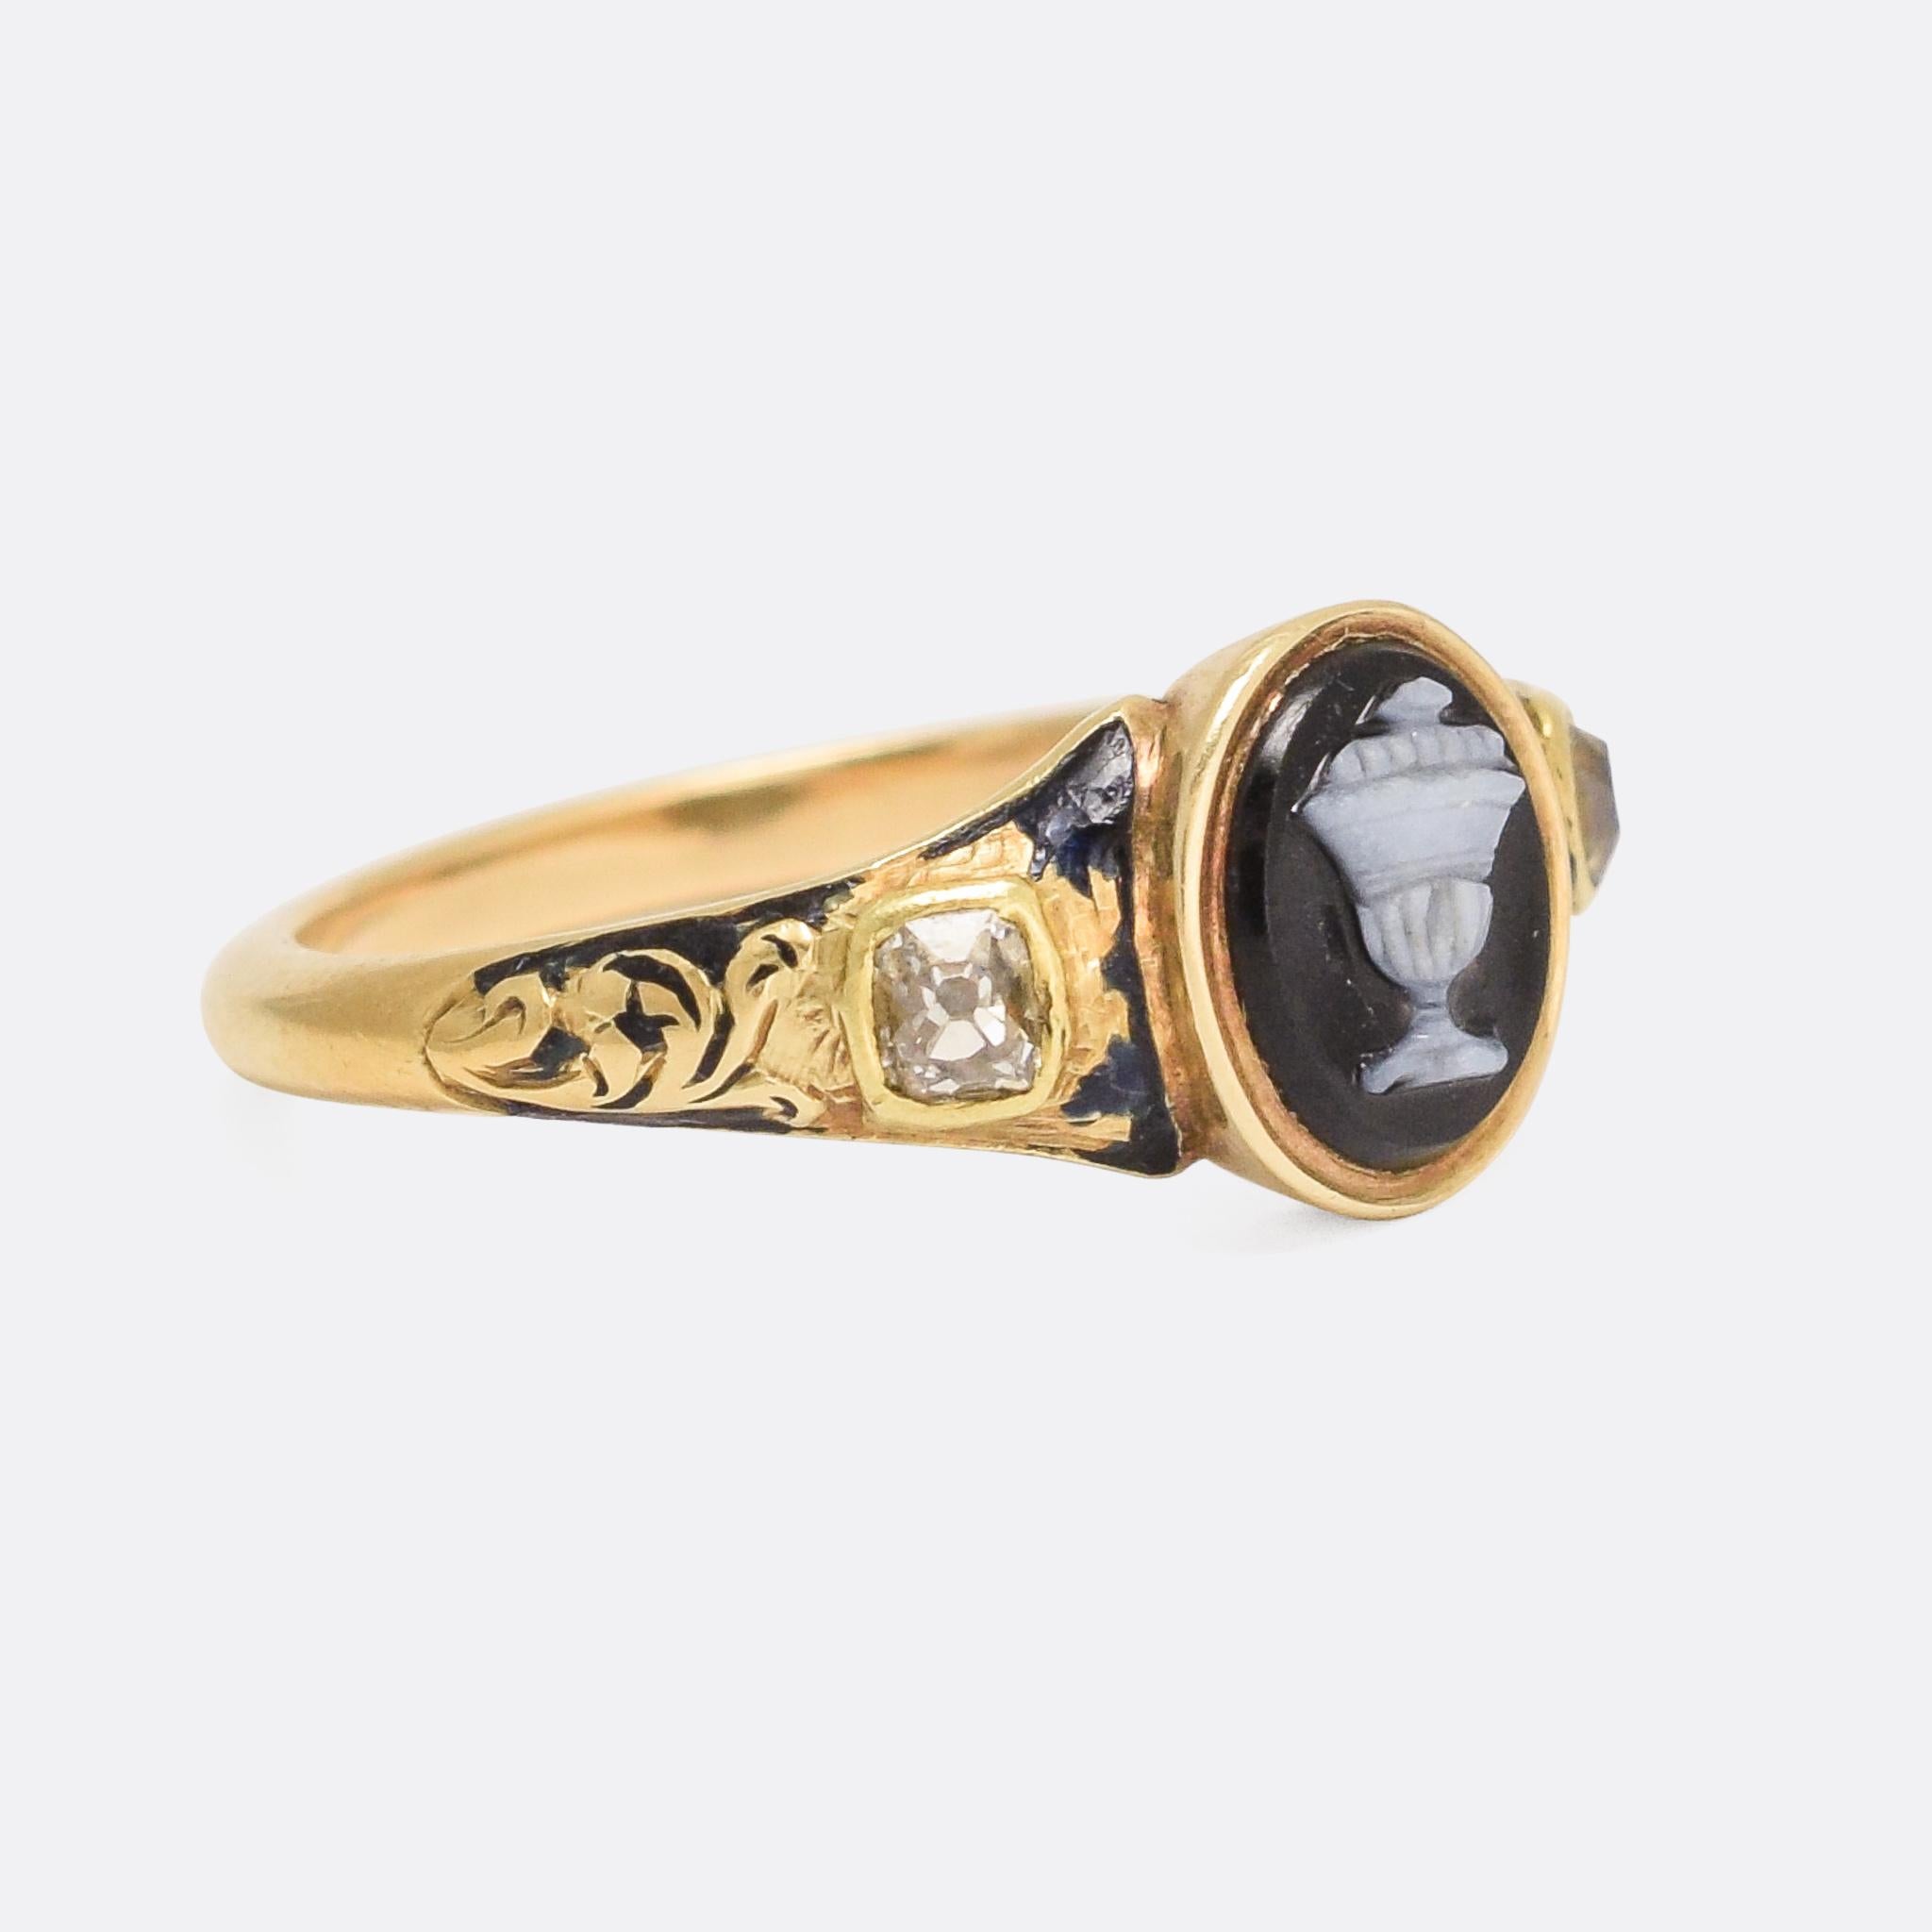 An exceptional Georgian mourning ring with an Urn onyx cameo centrepiece, old mine cut diamond shoulder accents, and an oval locket compartment hidden behind the head. The shoulders also feature fine foliate detailing, and, quite remarkably given